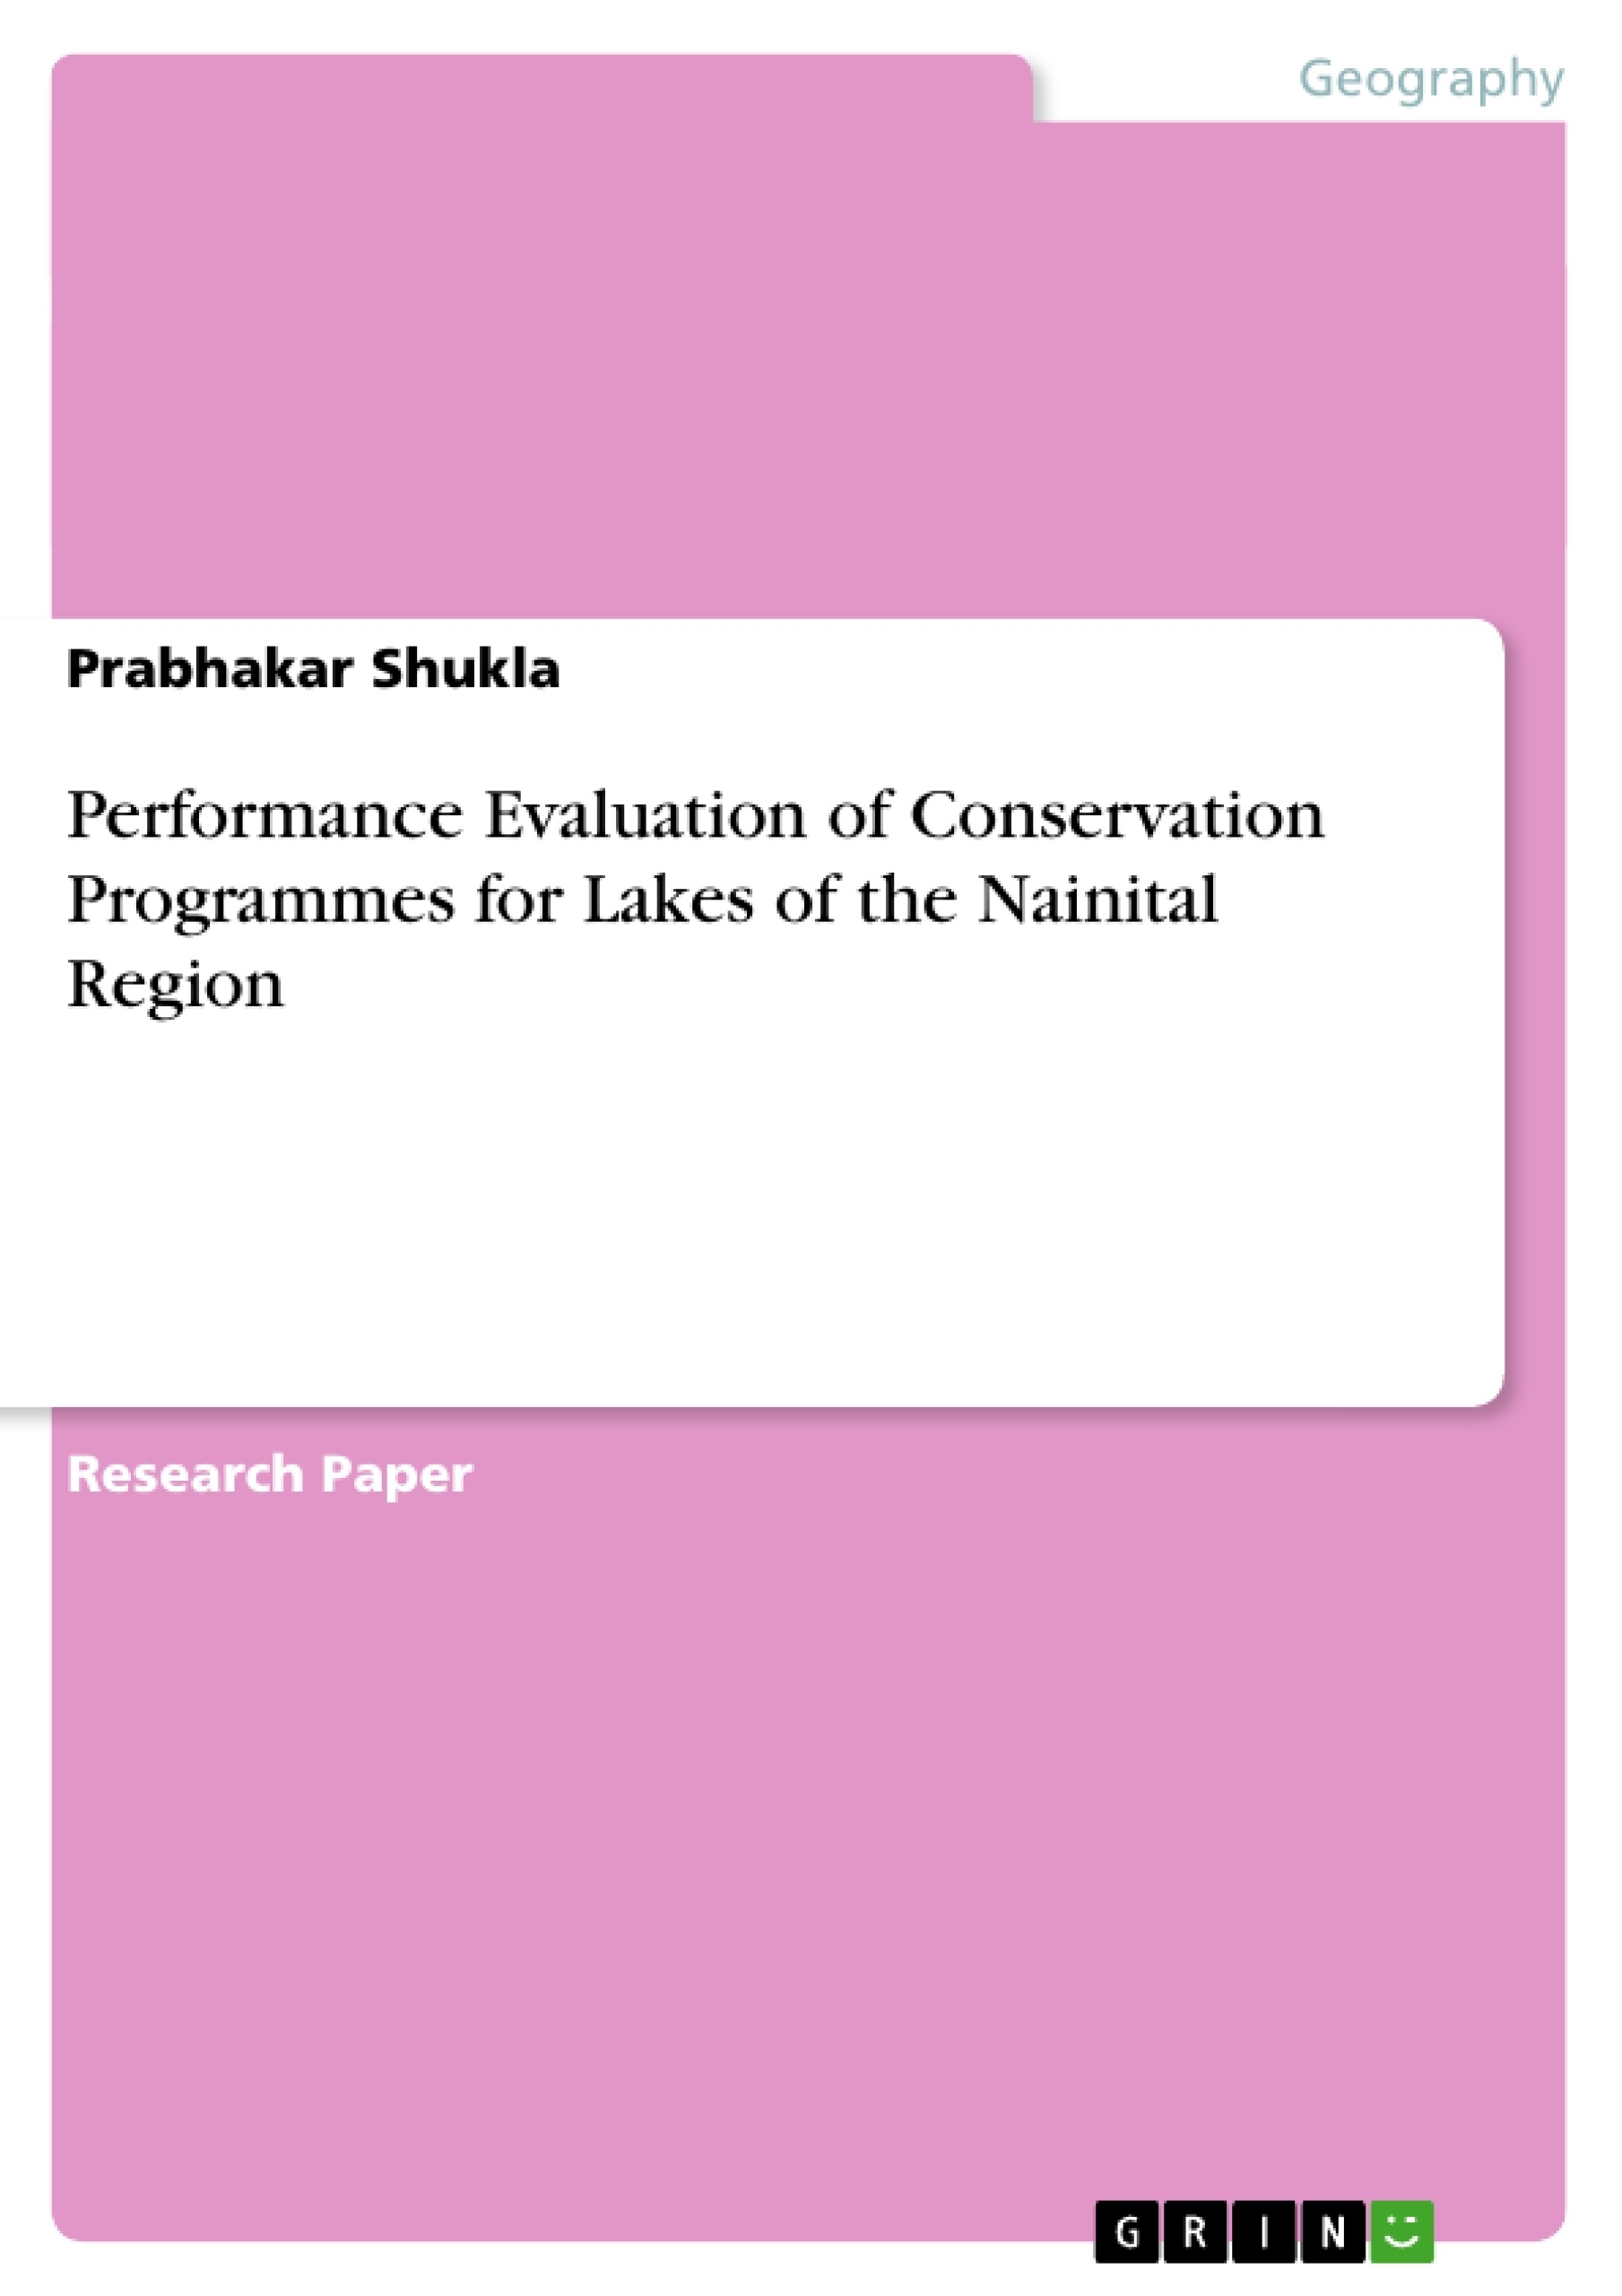 Title: Performance Evaluation of Conservation Programmes for Lakes of the Nainital Region